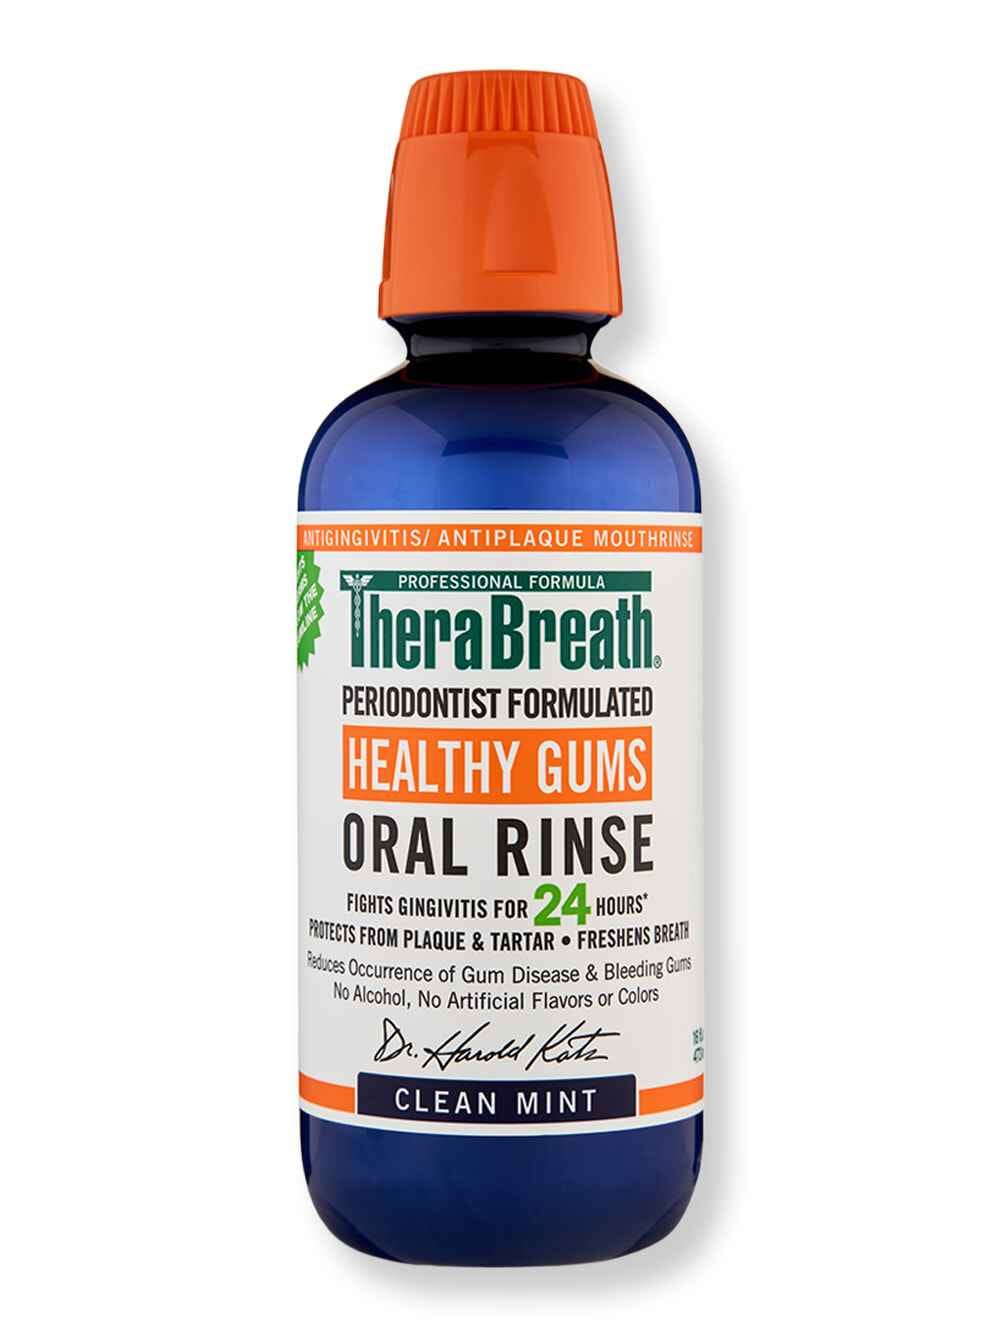 TheraBreath TheraBreath Healthy Gums Oral Rinse 16 oz Mouthwashes & Toothpastes 